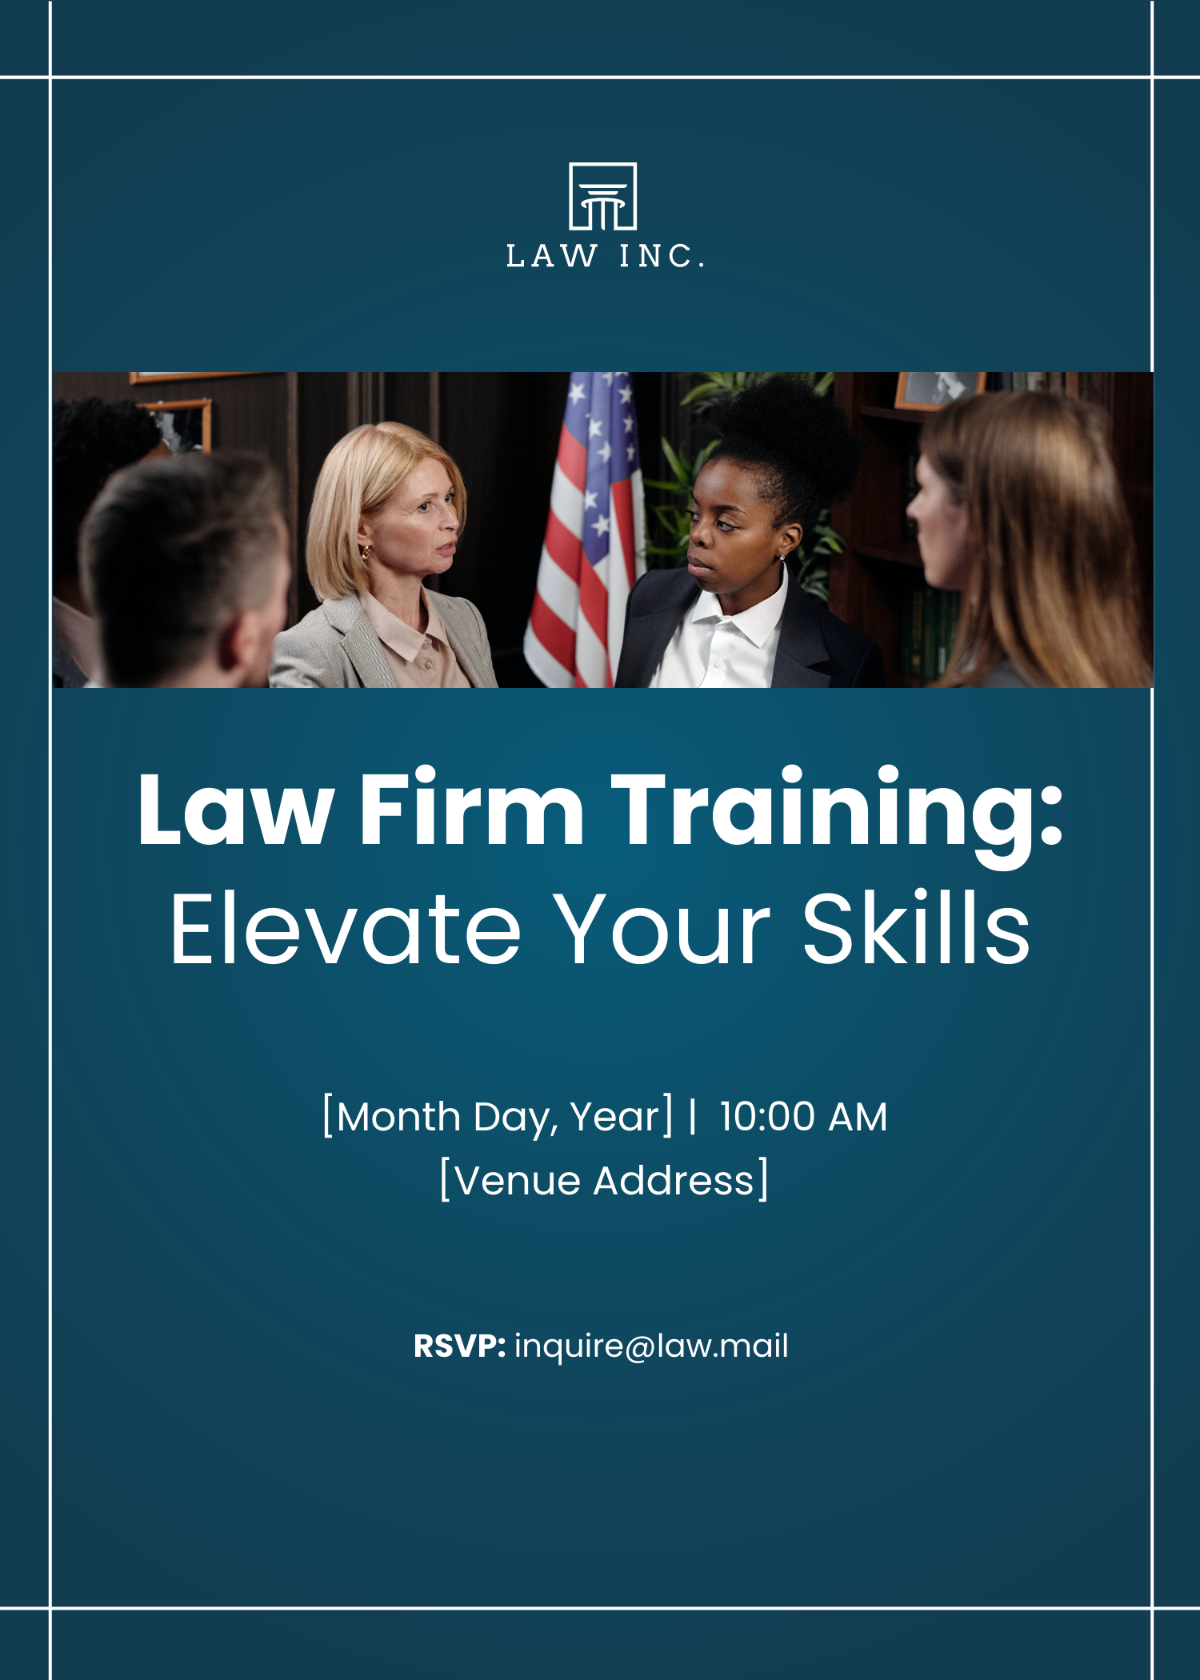 Law Firm Training Invitation Template